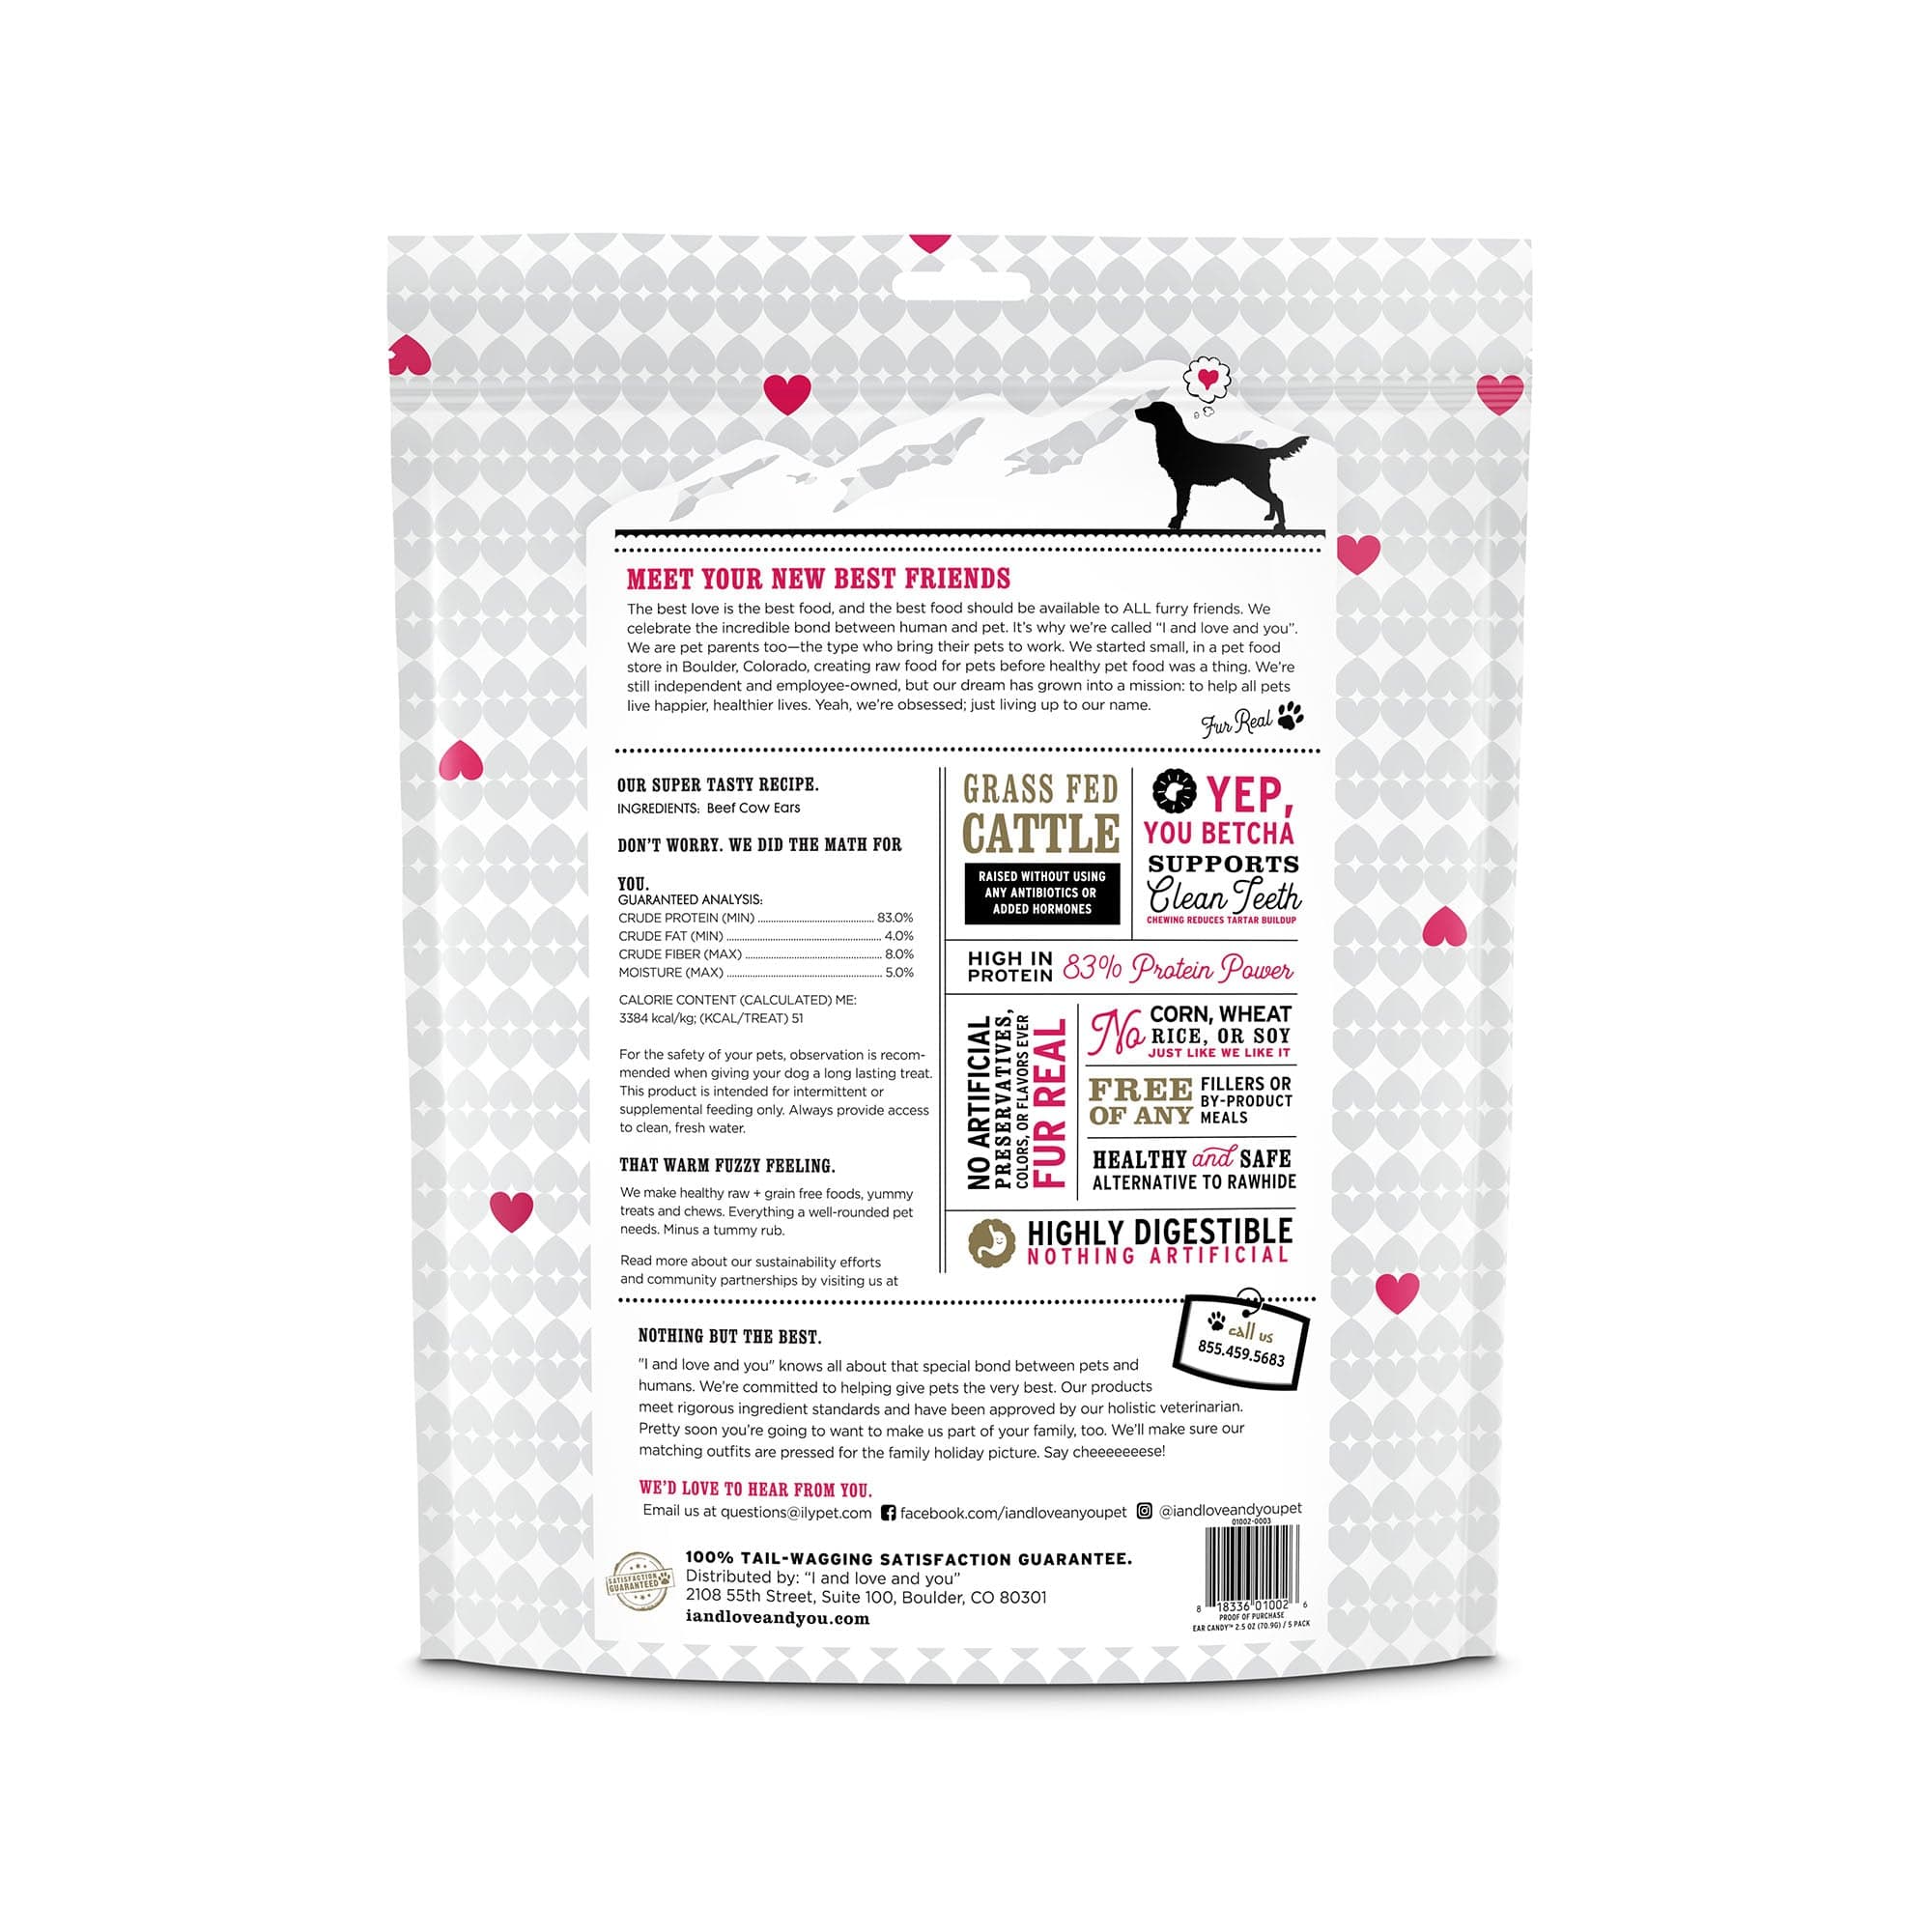 Ear Candy Beef Ear Chews packaging back side with list of ingredients, instructions and barcode